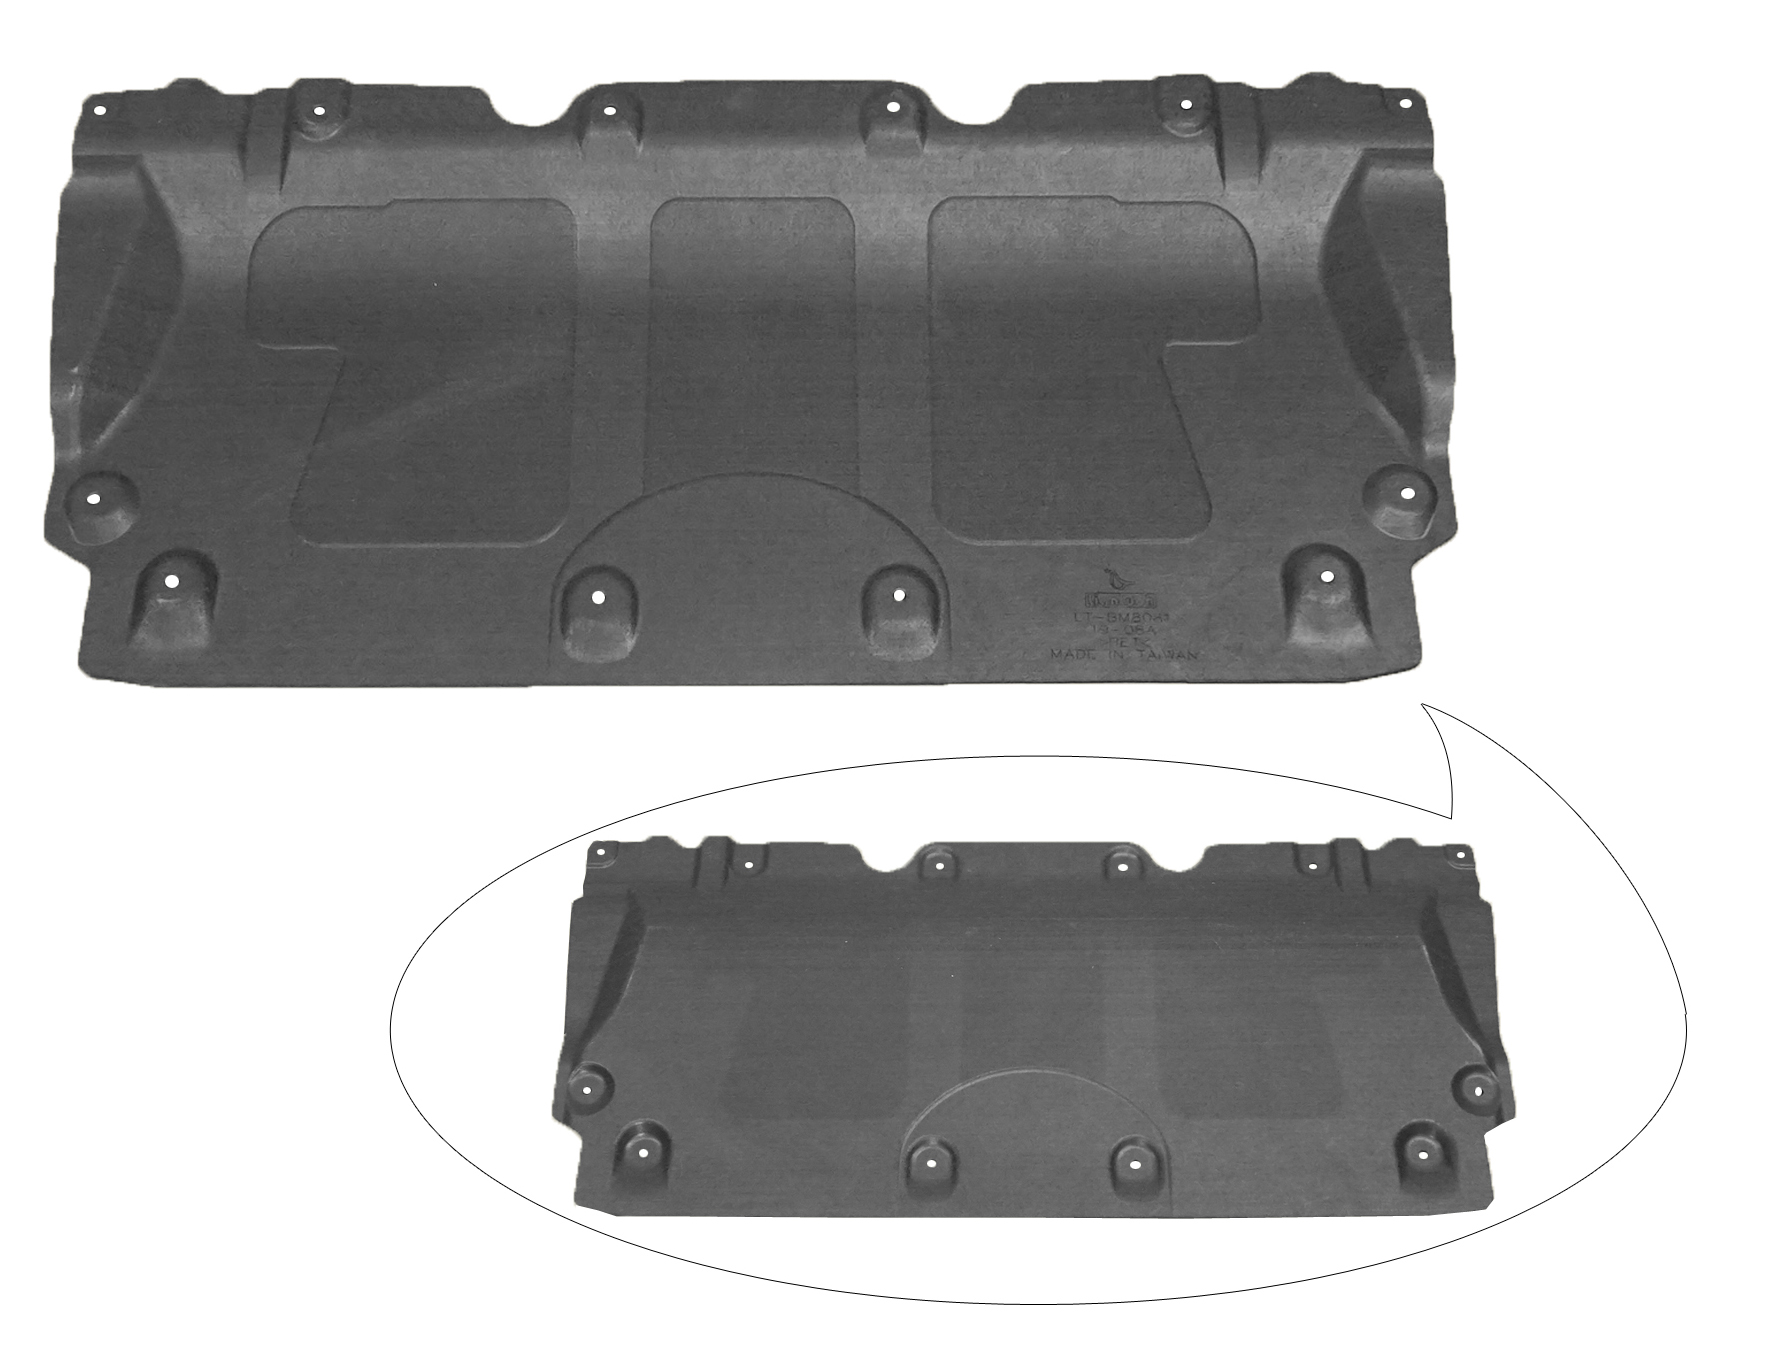 Aftermarket UNDER ENGINE COVERS for BMW - 430I, 430i,21-23,Lower engine cover